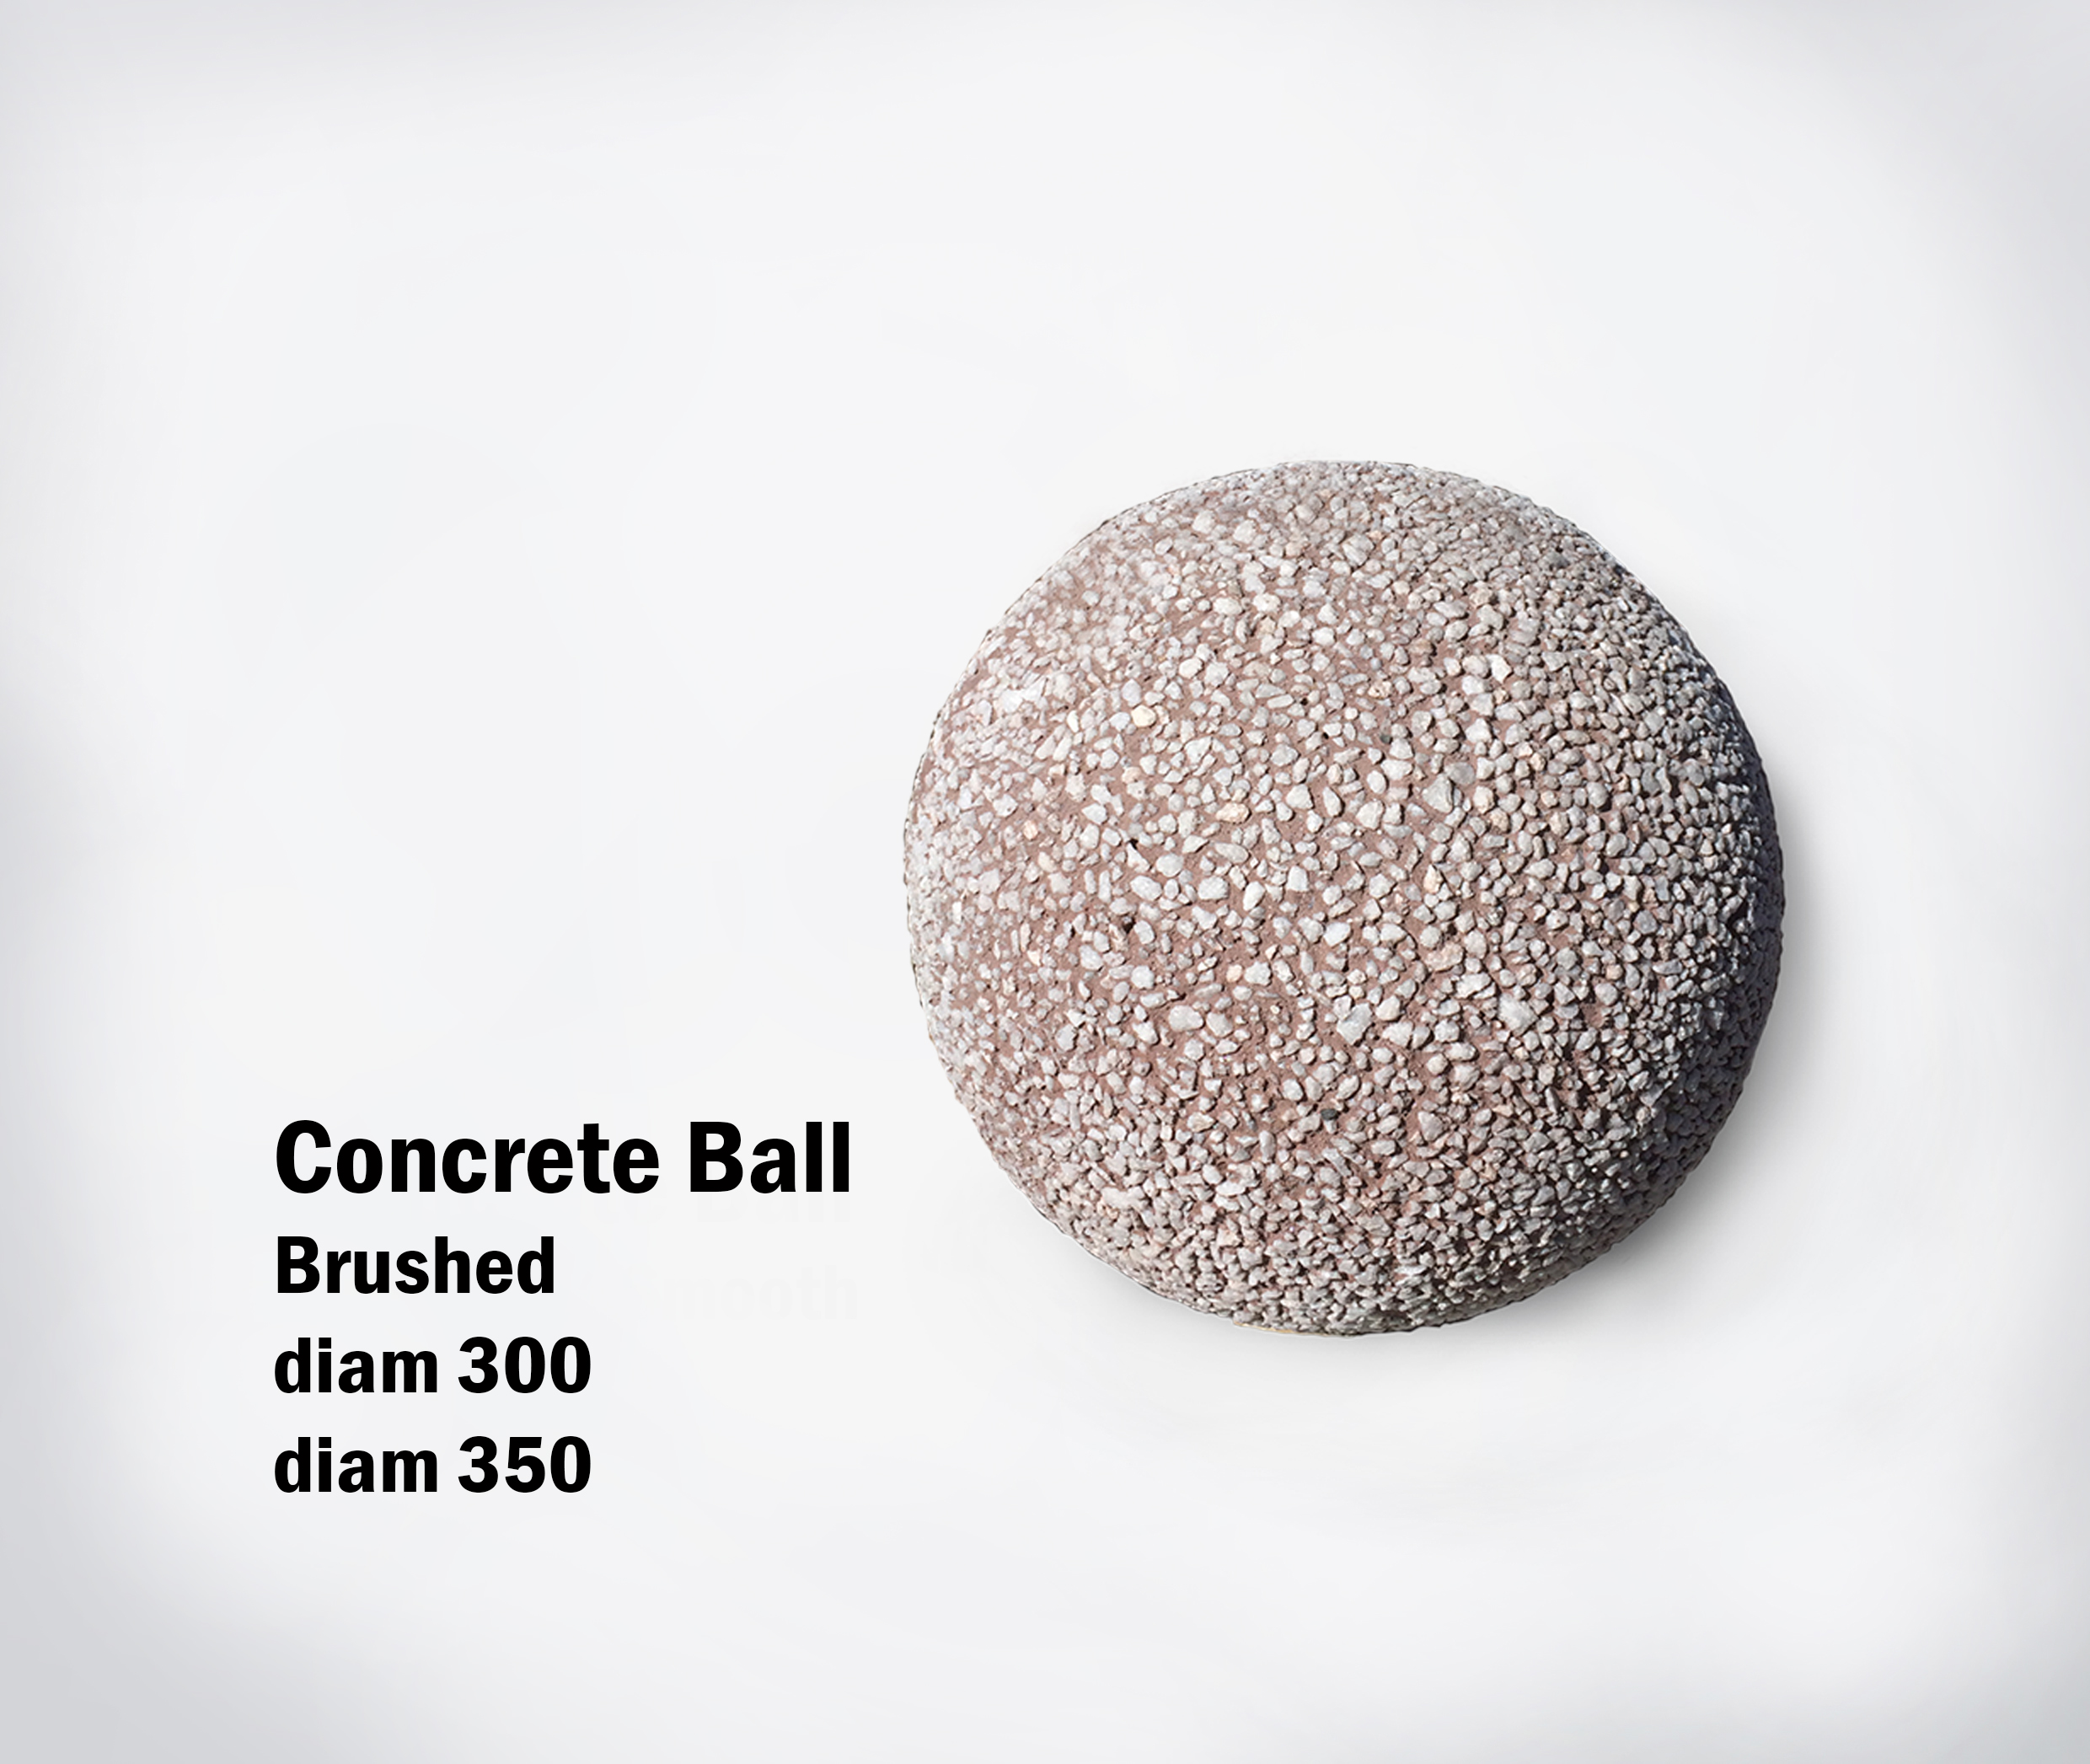 Concrete Ball Brushed